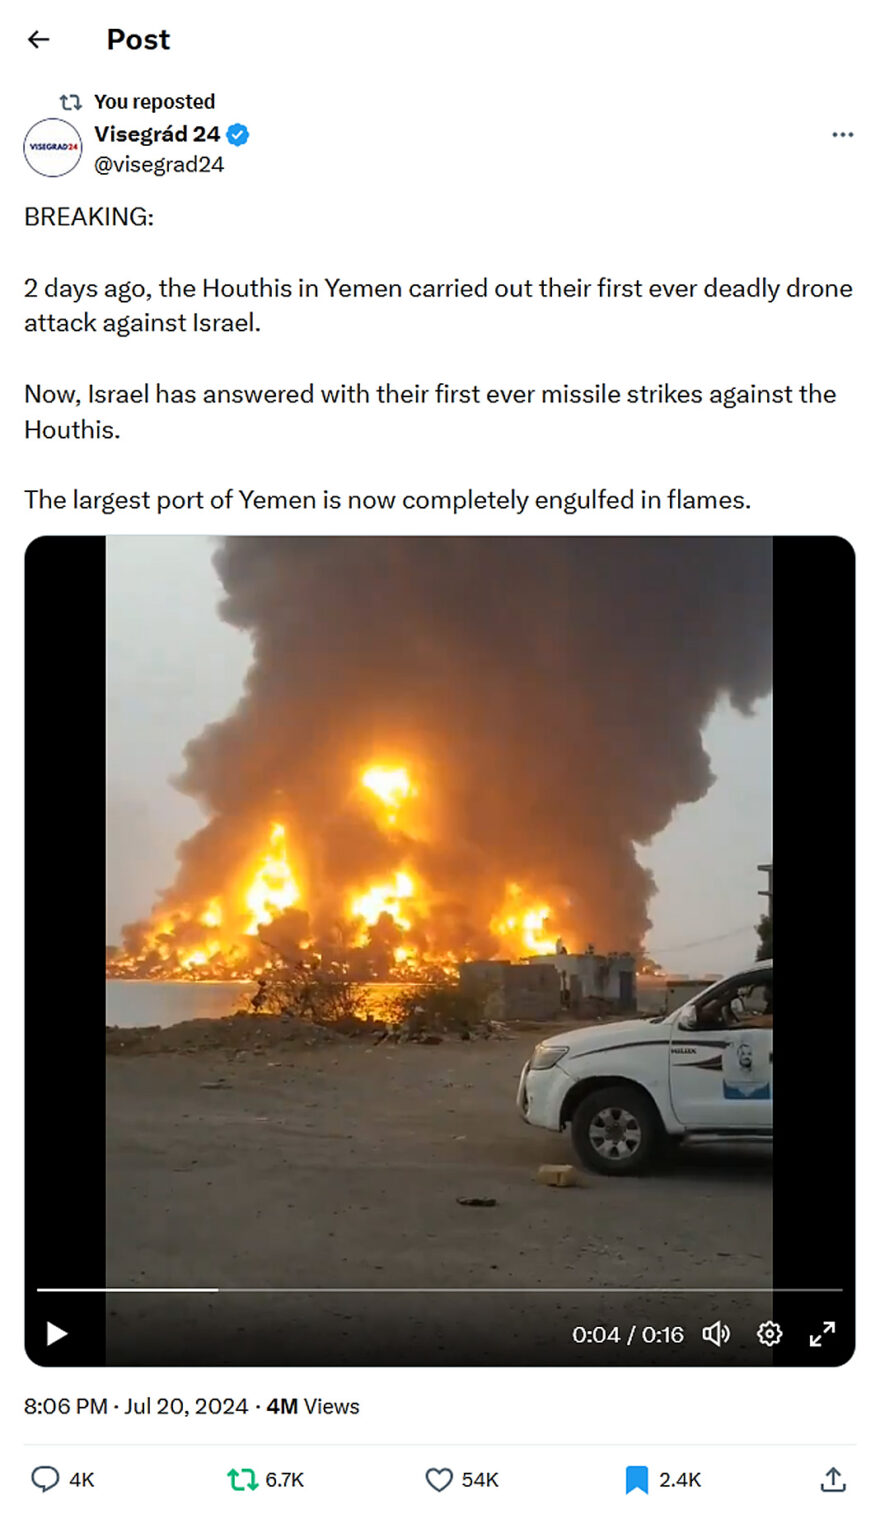 Visegrád 24-tweet-20July2024-largest port of Yemen is now completely engulfed in flames